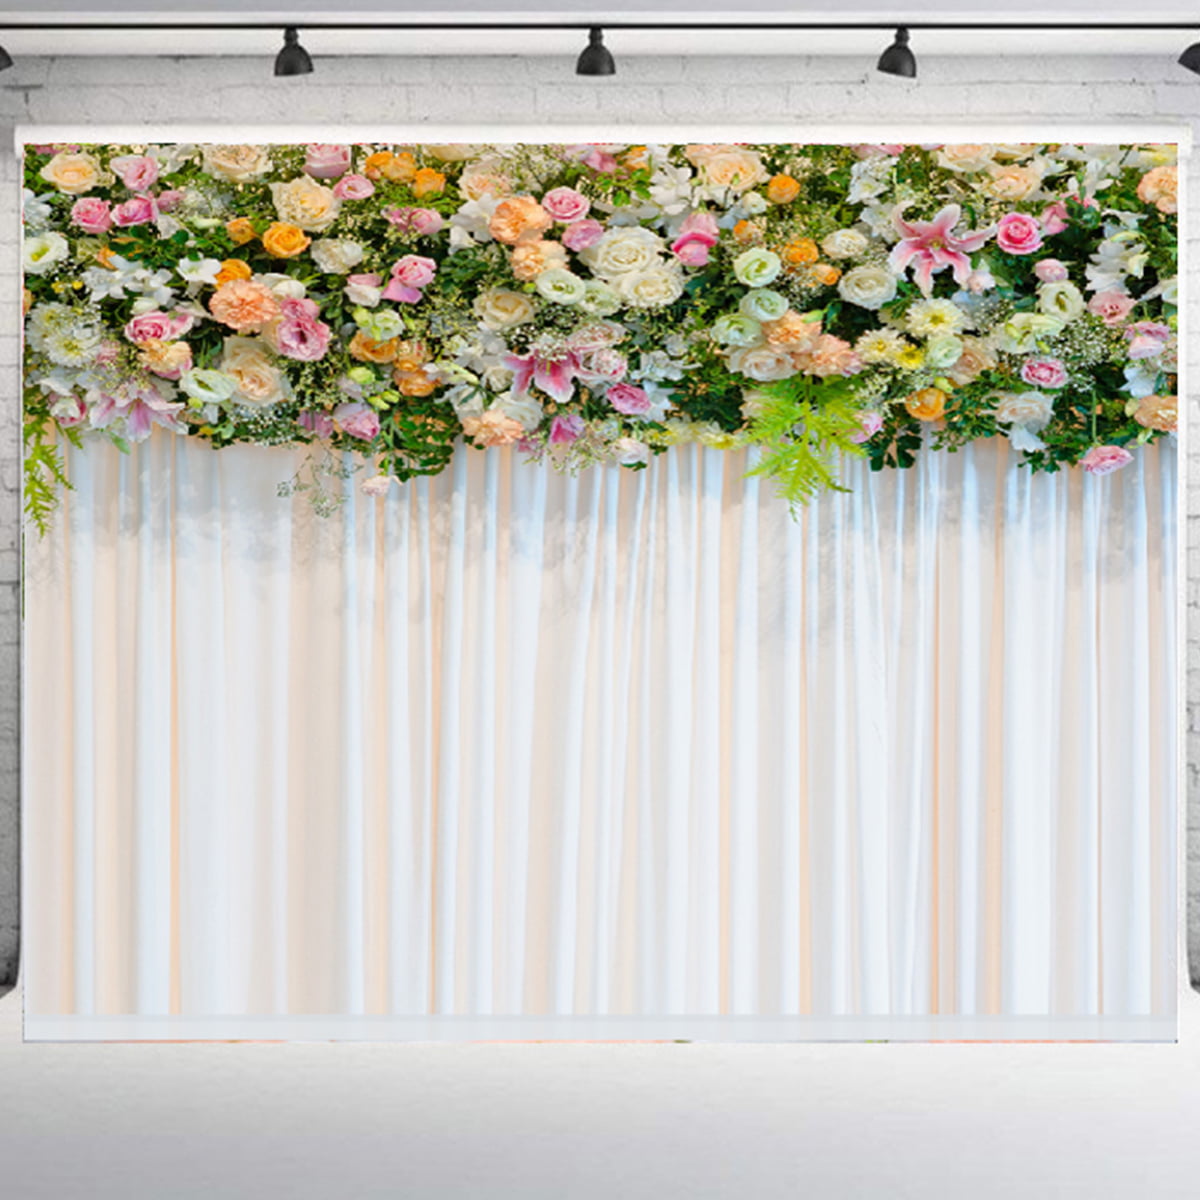 5x7ft Cloth Flowers Ladder Sun Photography Background Computer-Printed Vinyl Backdrops 